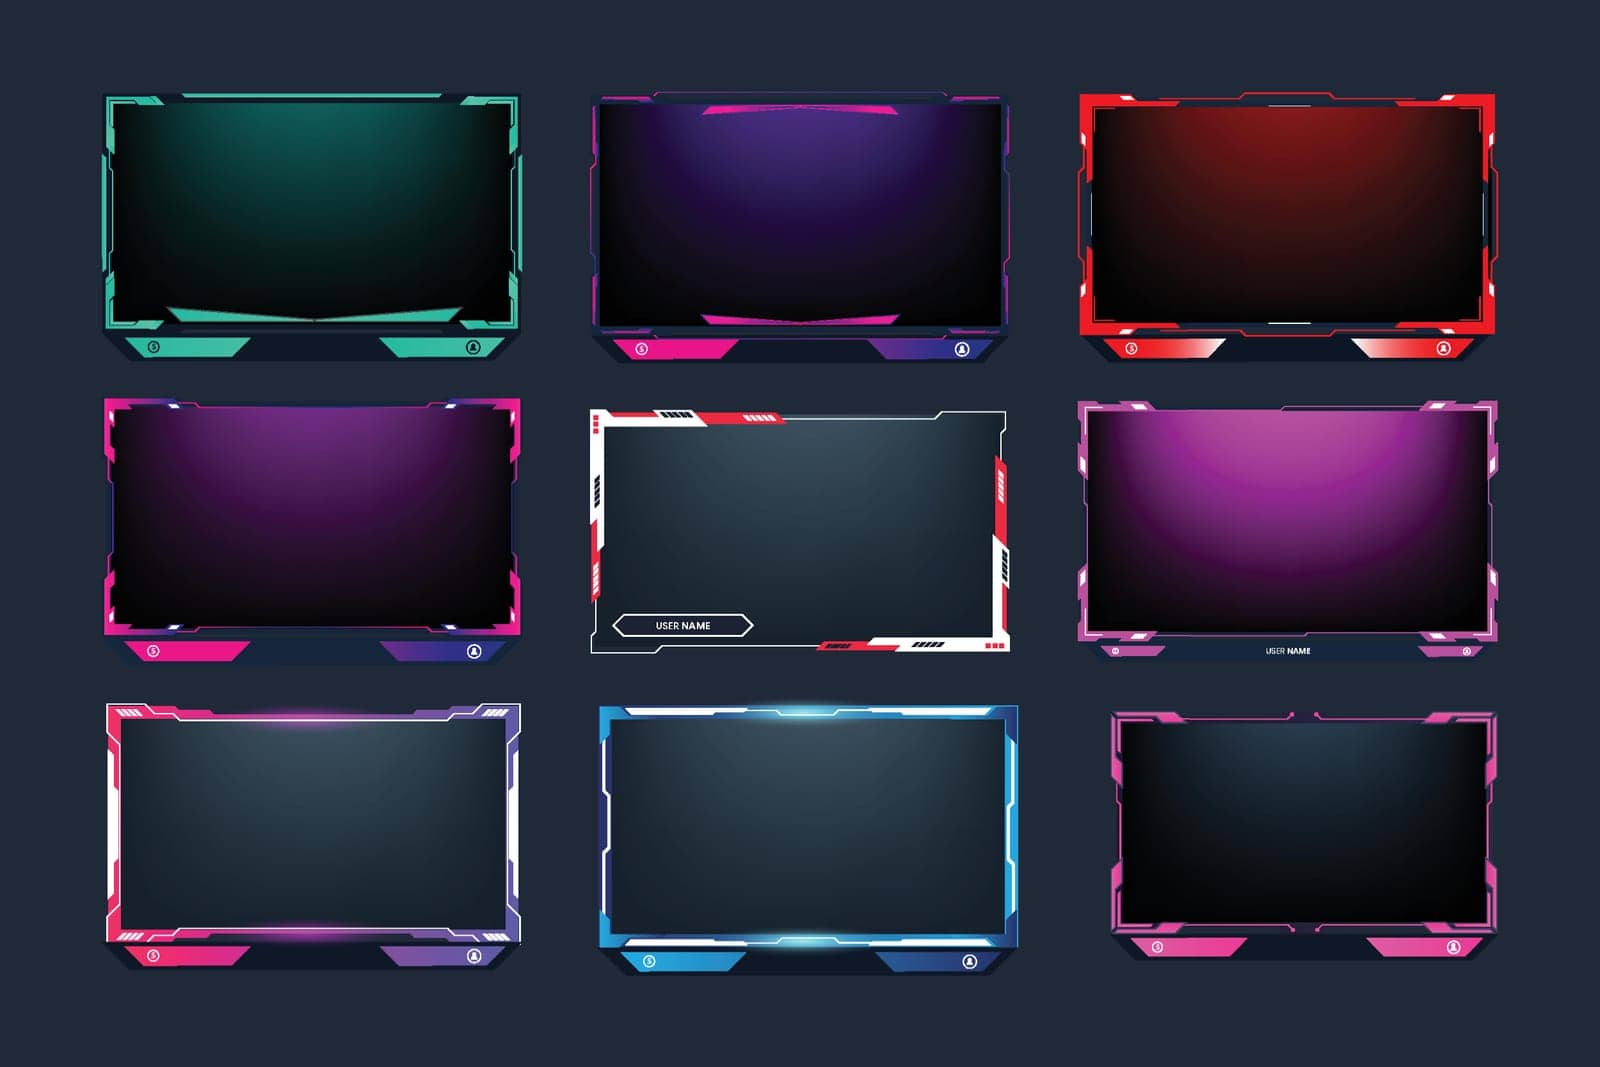 Streaming overlay vector collection on a dark background. Gaming screen panel set design with pink, blue, and red colors. Unique broadcast screen border bundle design for online gamers.